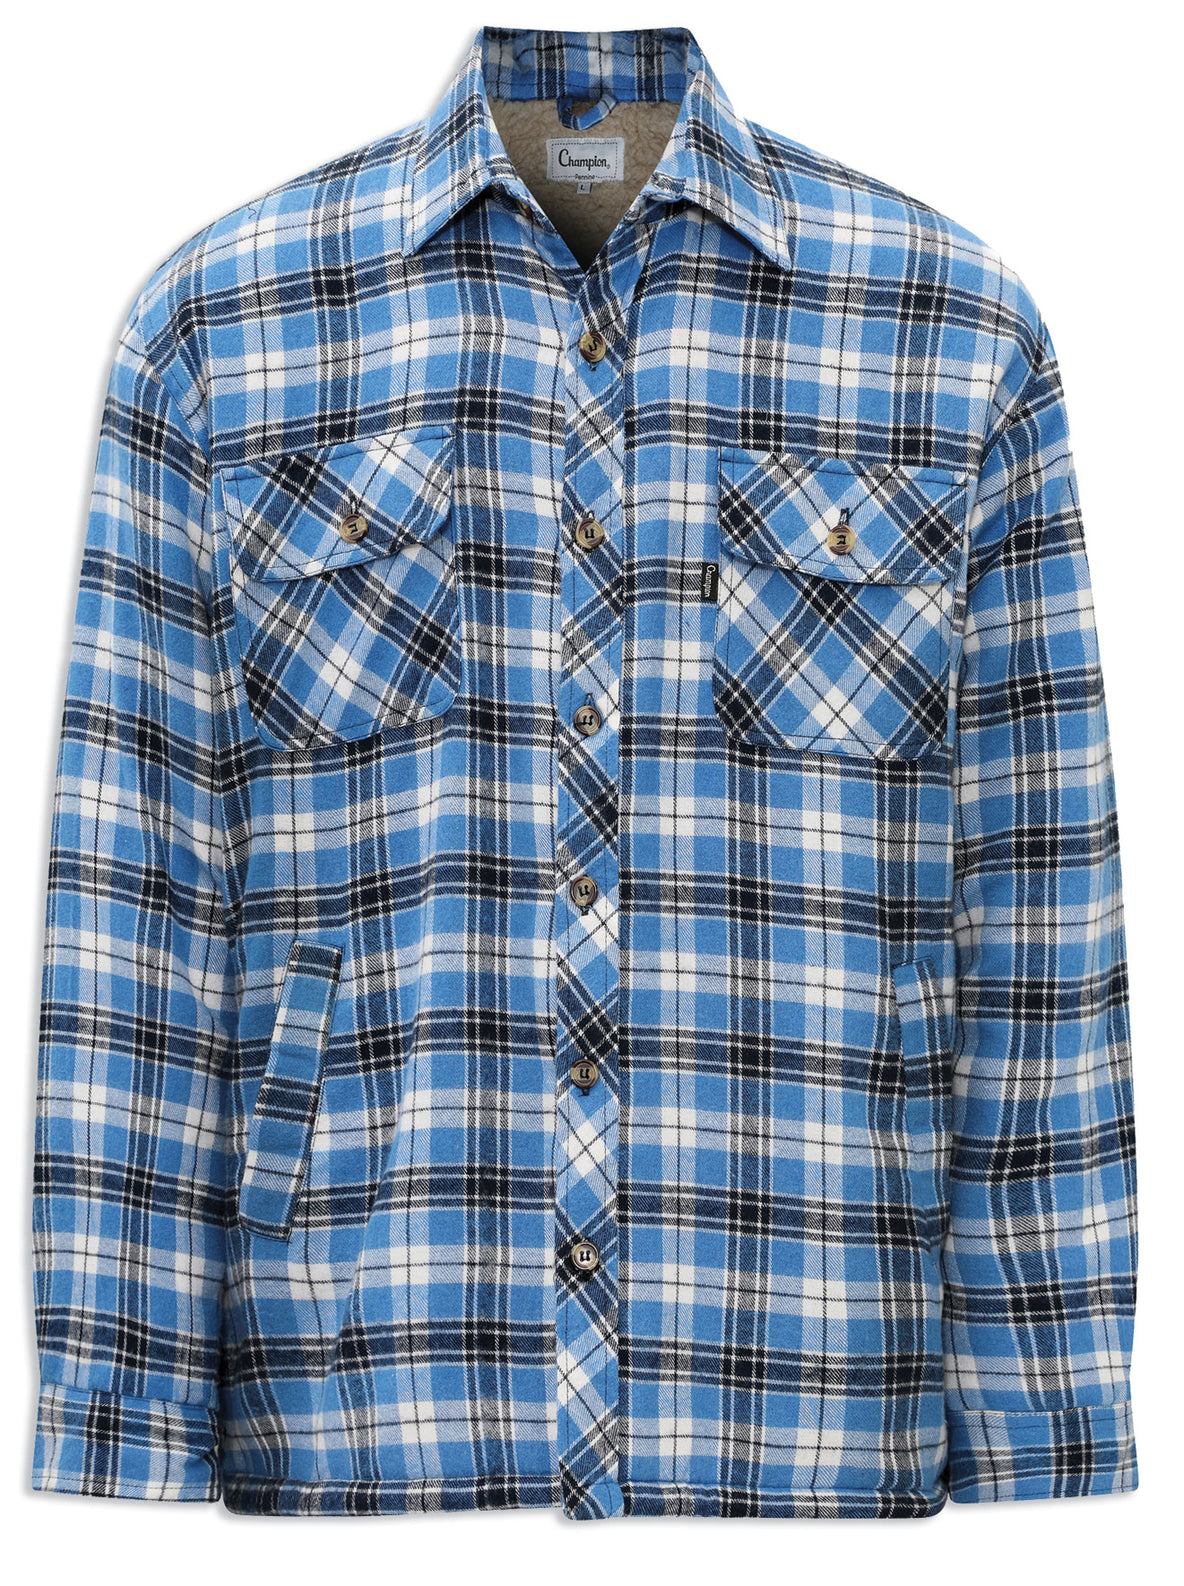 Fleece-Lined Winter Shirts and Padded Shirt Jackets